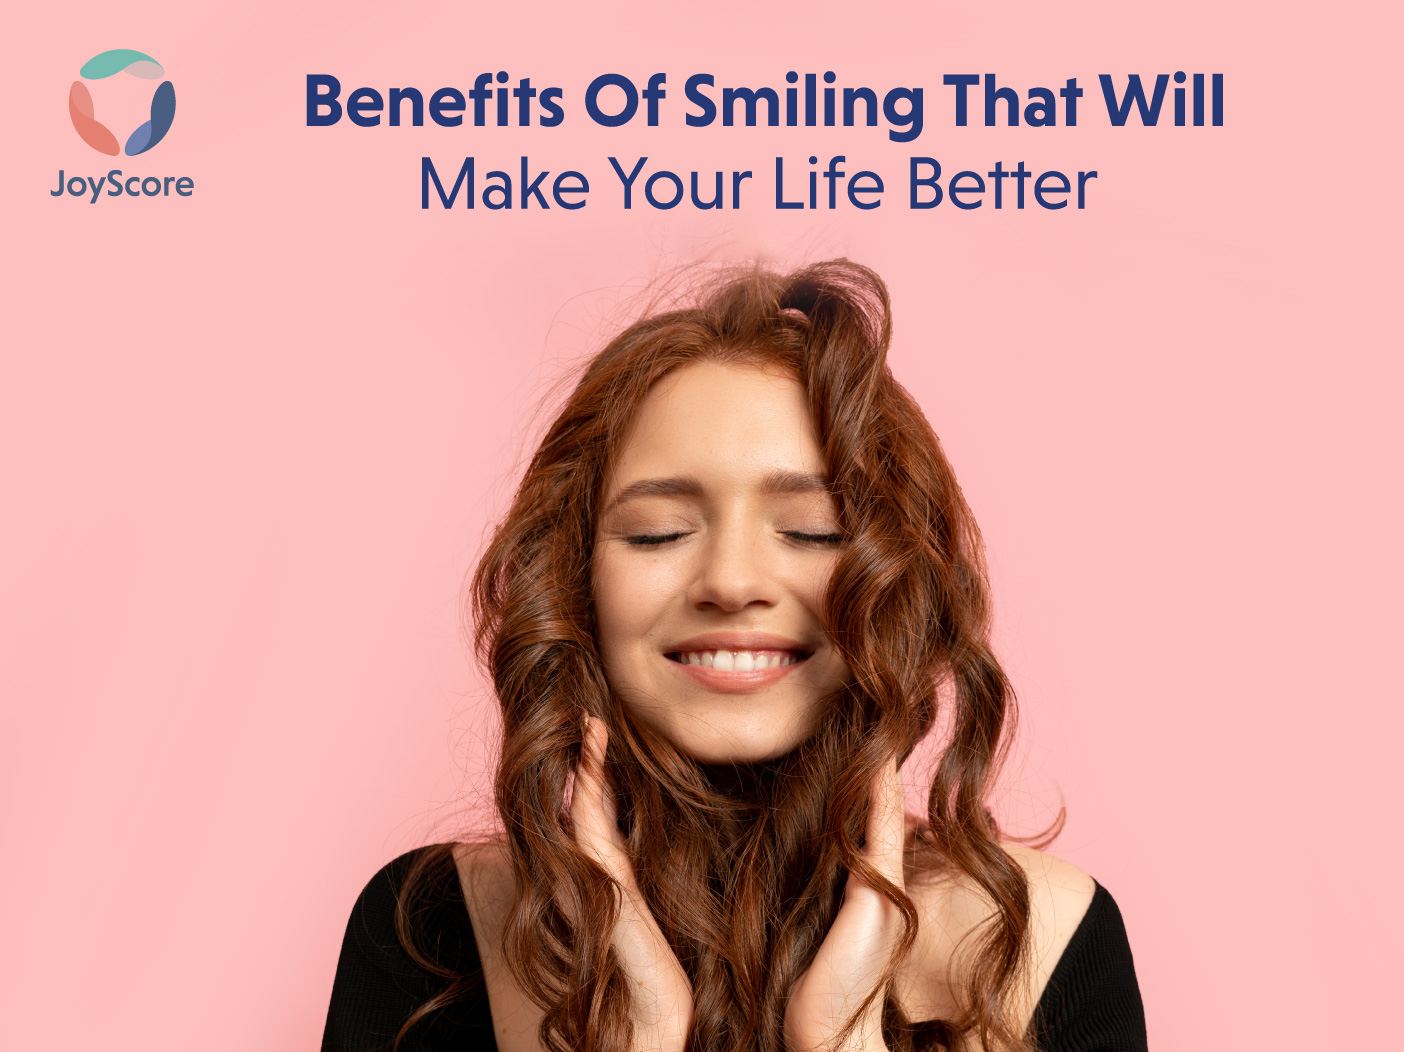 Benefits of Smiling